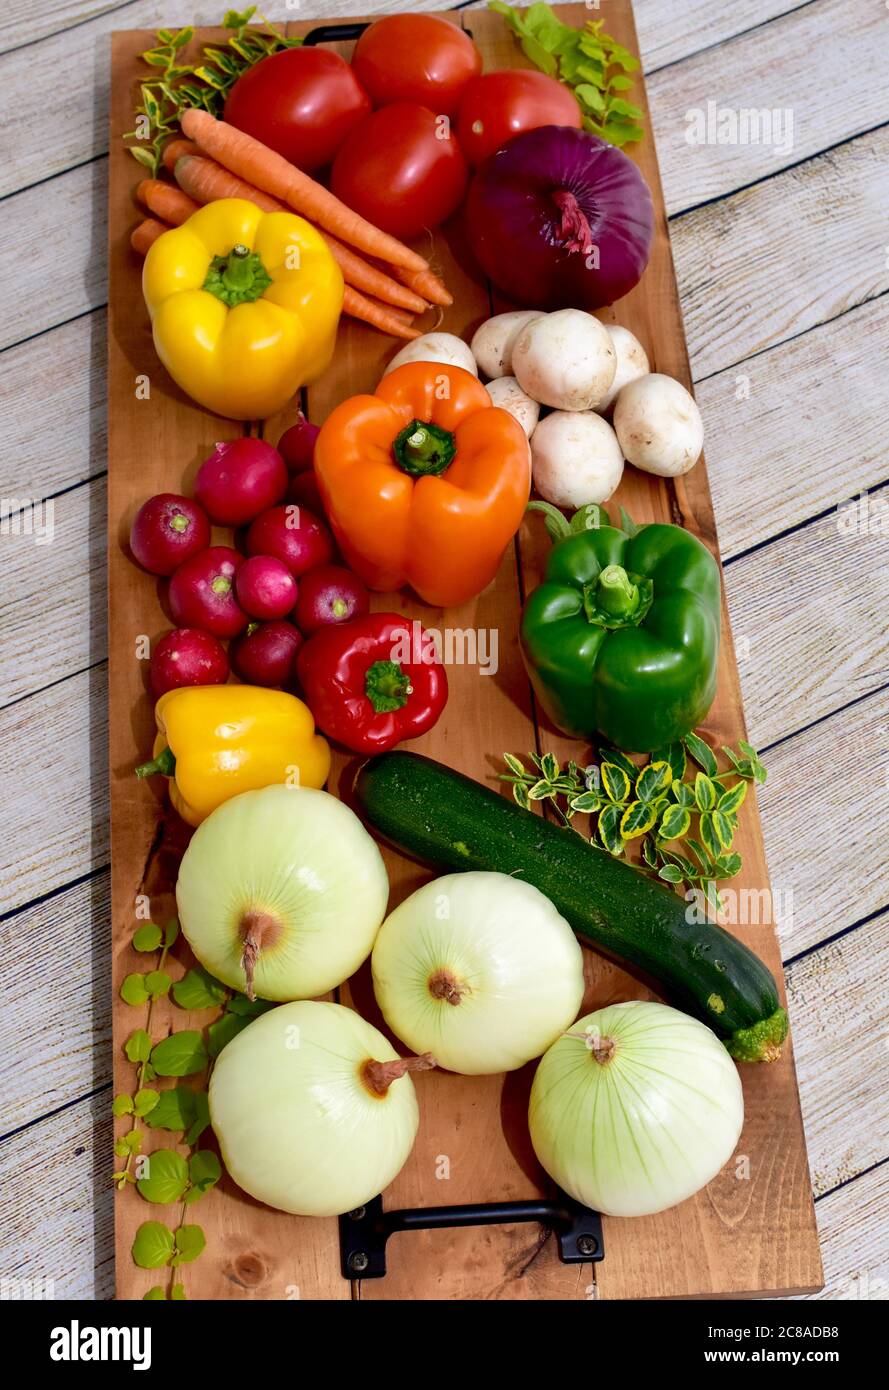 Fresh organic farmer's market vegetables washed and ready to cook into healthy lifestyle family meals Stock Photo